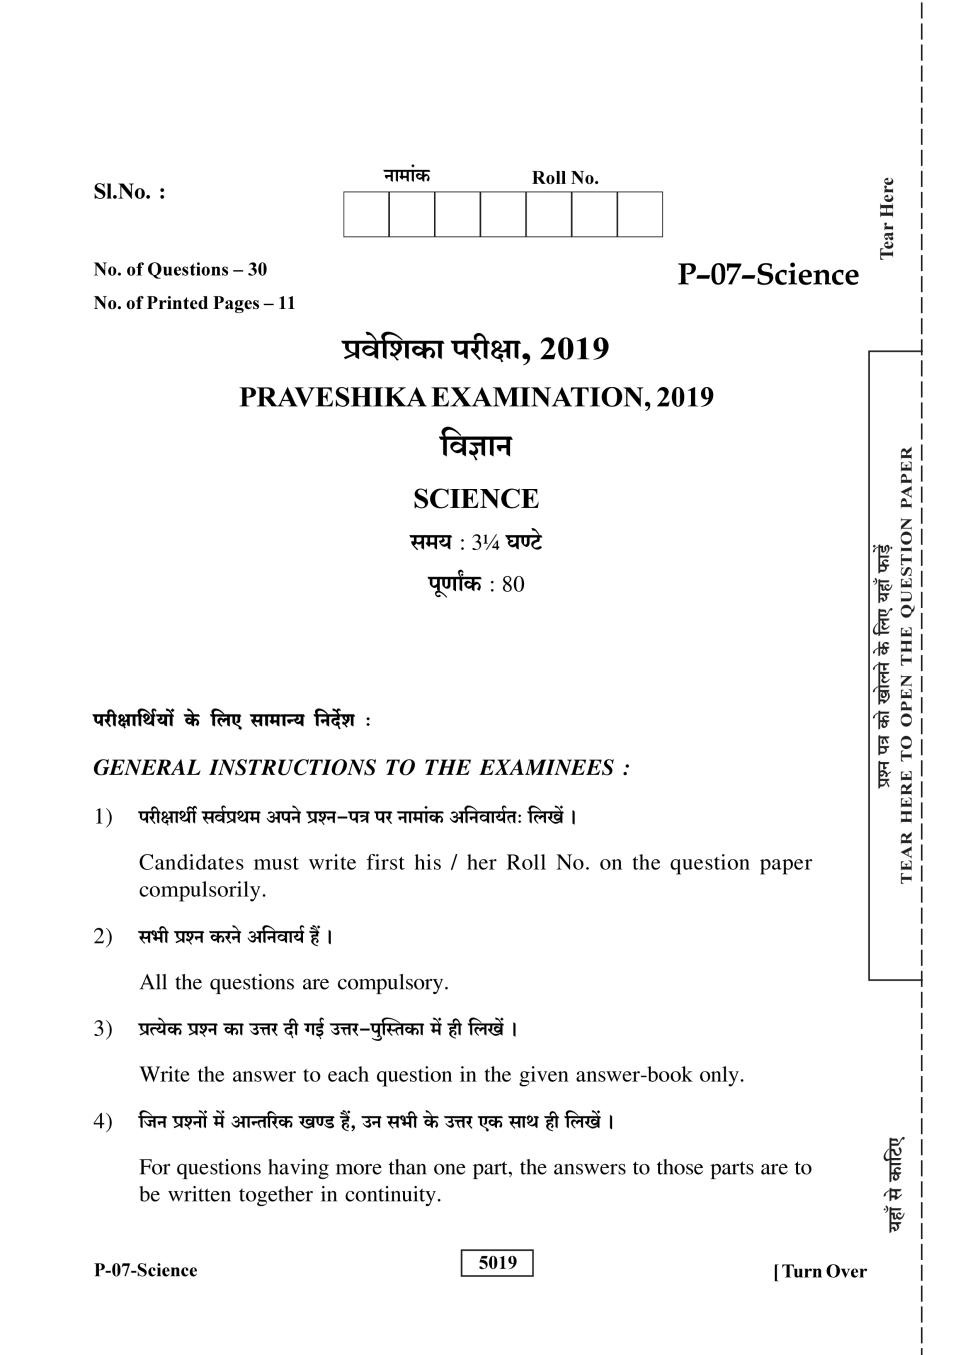 Rajasthan Board Praveshika Science Question Paper 2019 - Page 1